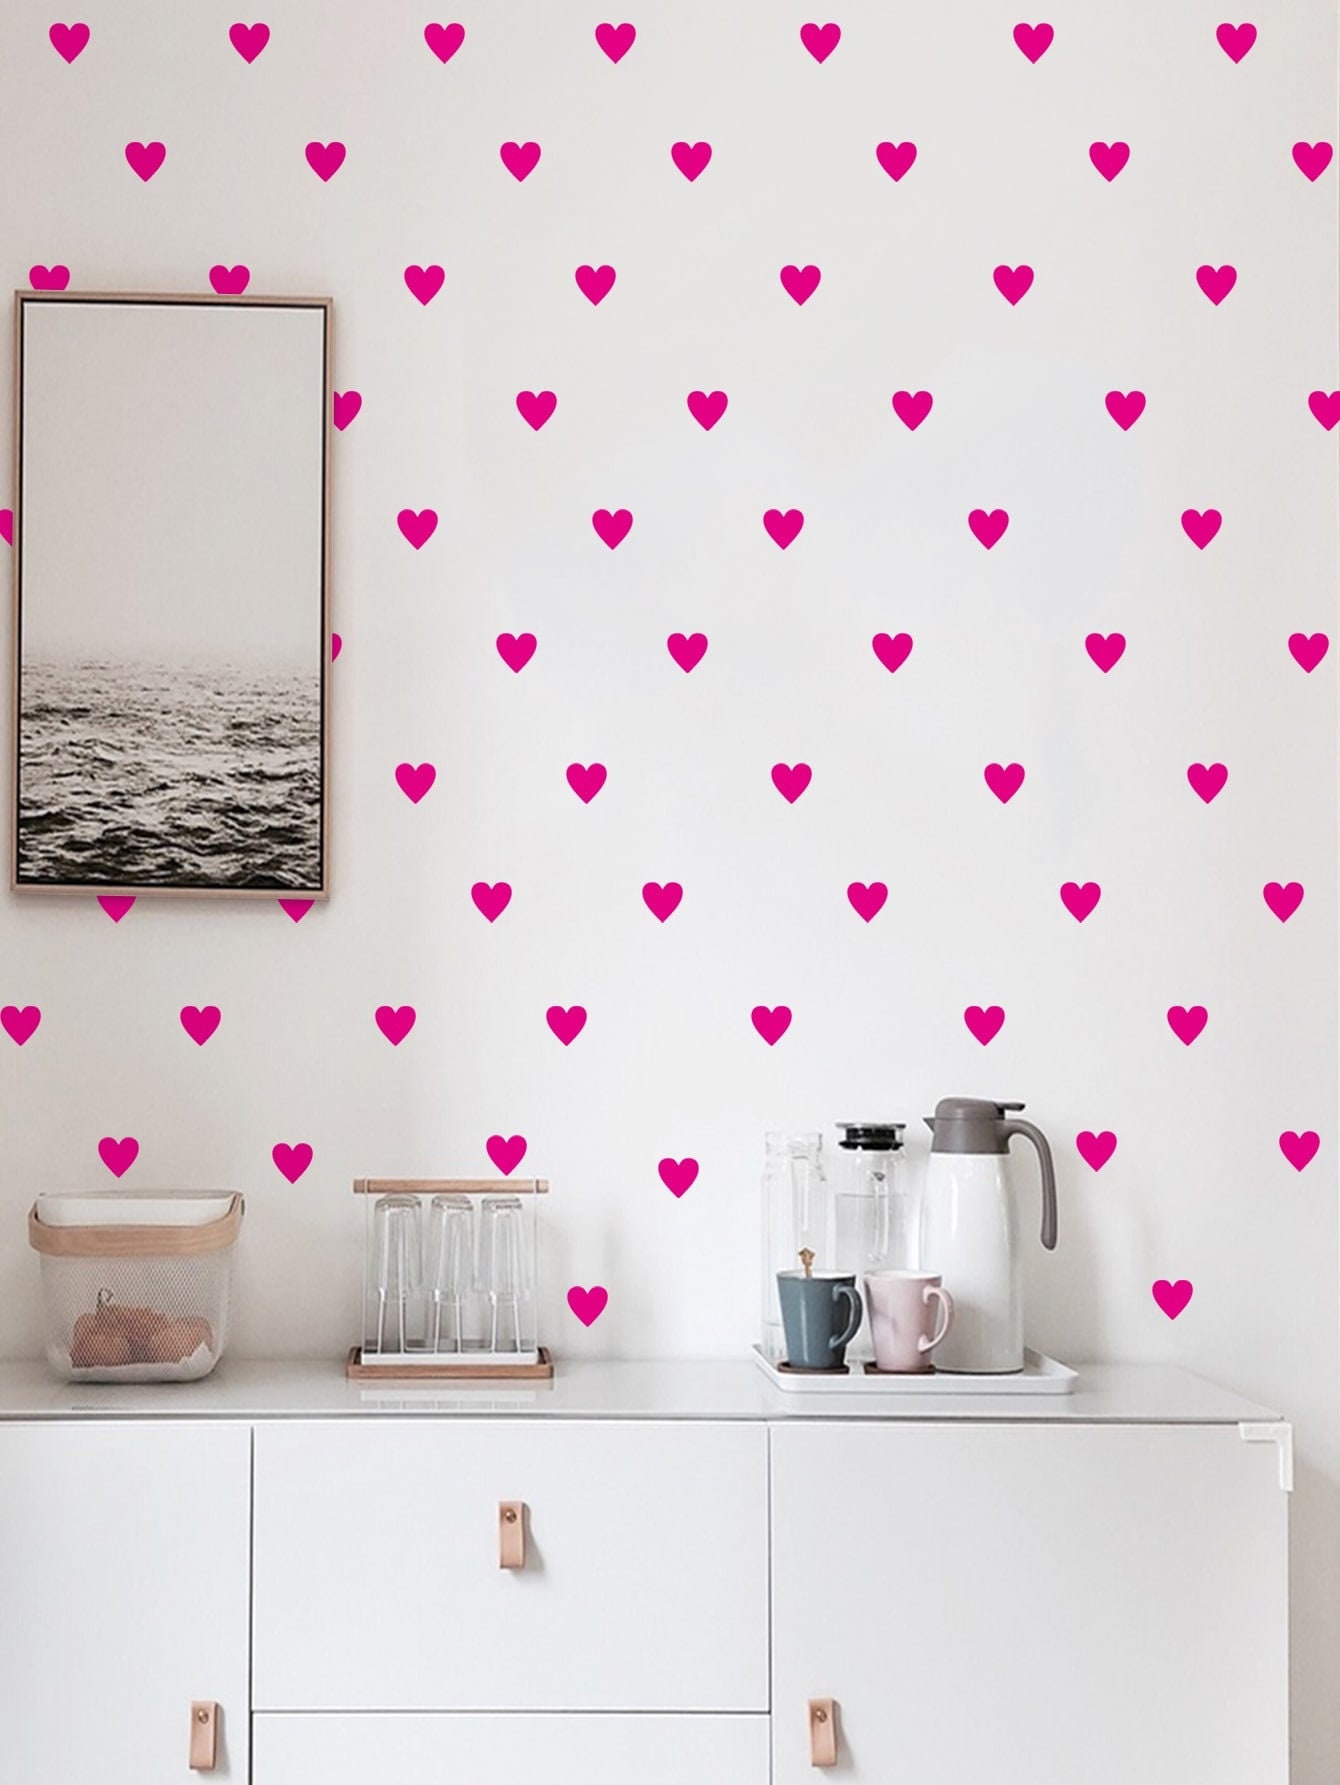 90 of 4" White Hearts DIY Removable Peel & Stick Wall Vinyl Decal Sticker